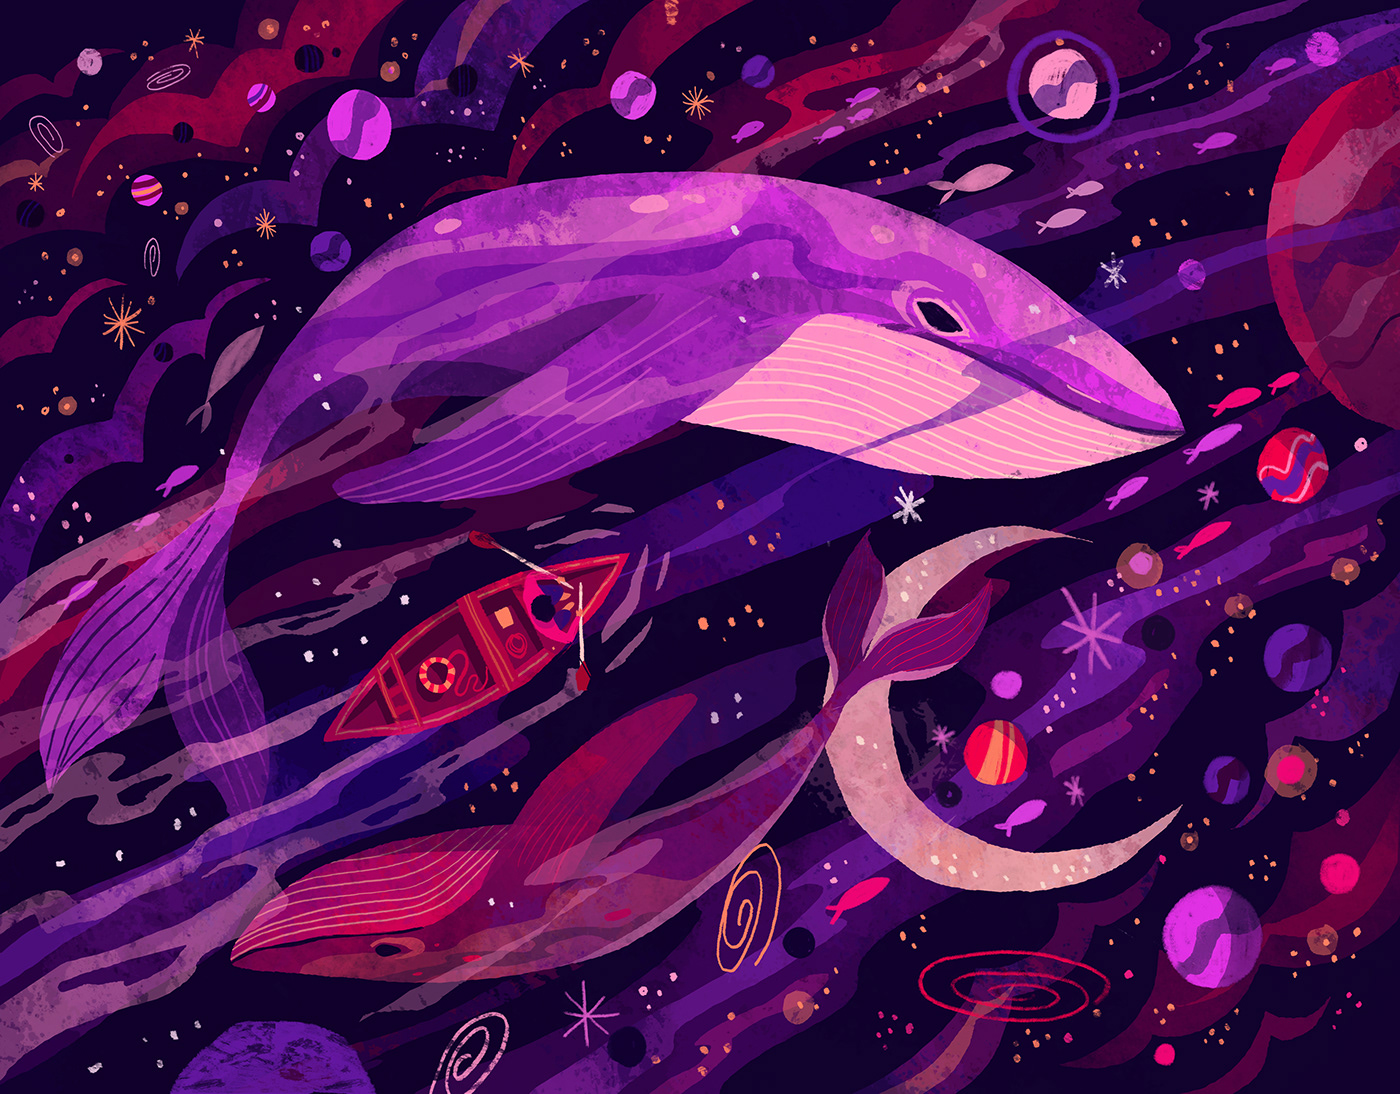 Affinity affinity designer boat galaxy illustration ILLUSTRATION  intergalactic sky illustration whale illustration whales